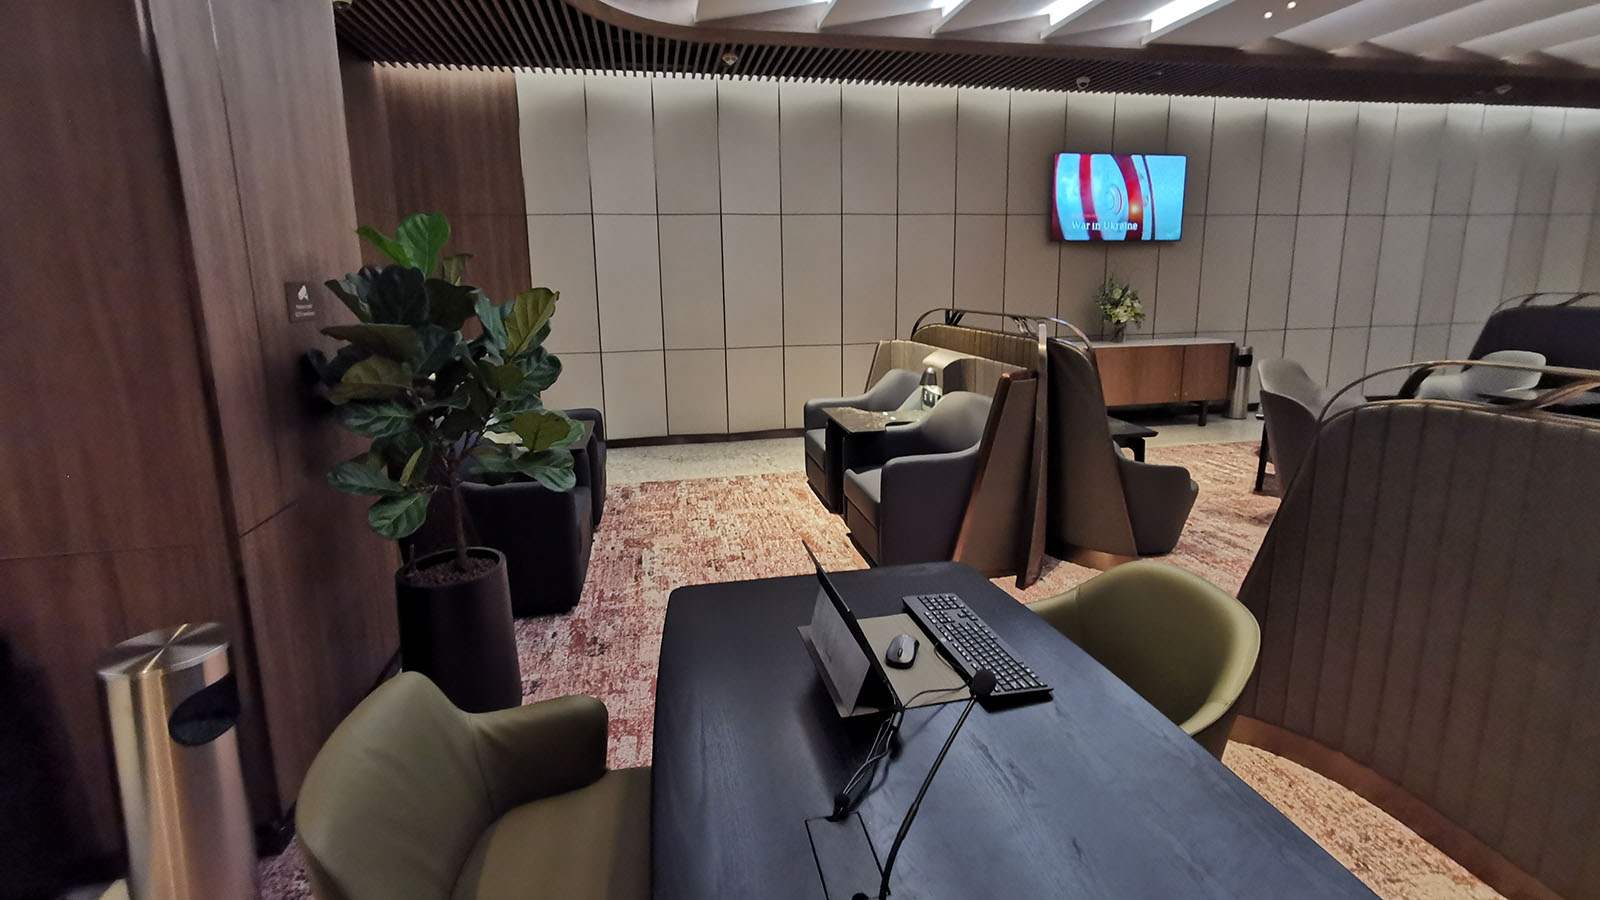 Singapore Airlines SilverKris First Class Lounge Singapore